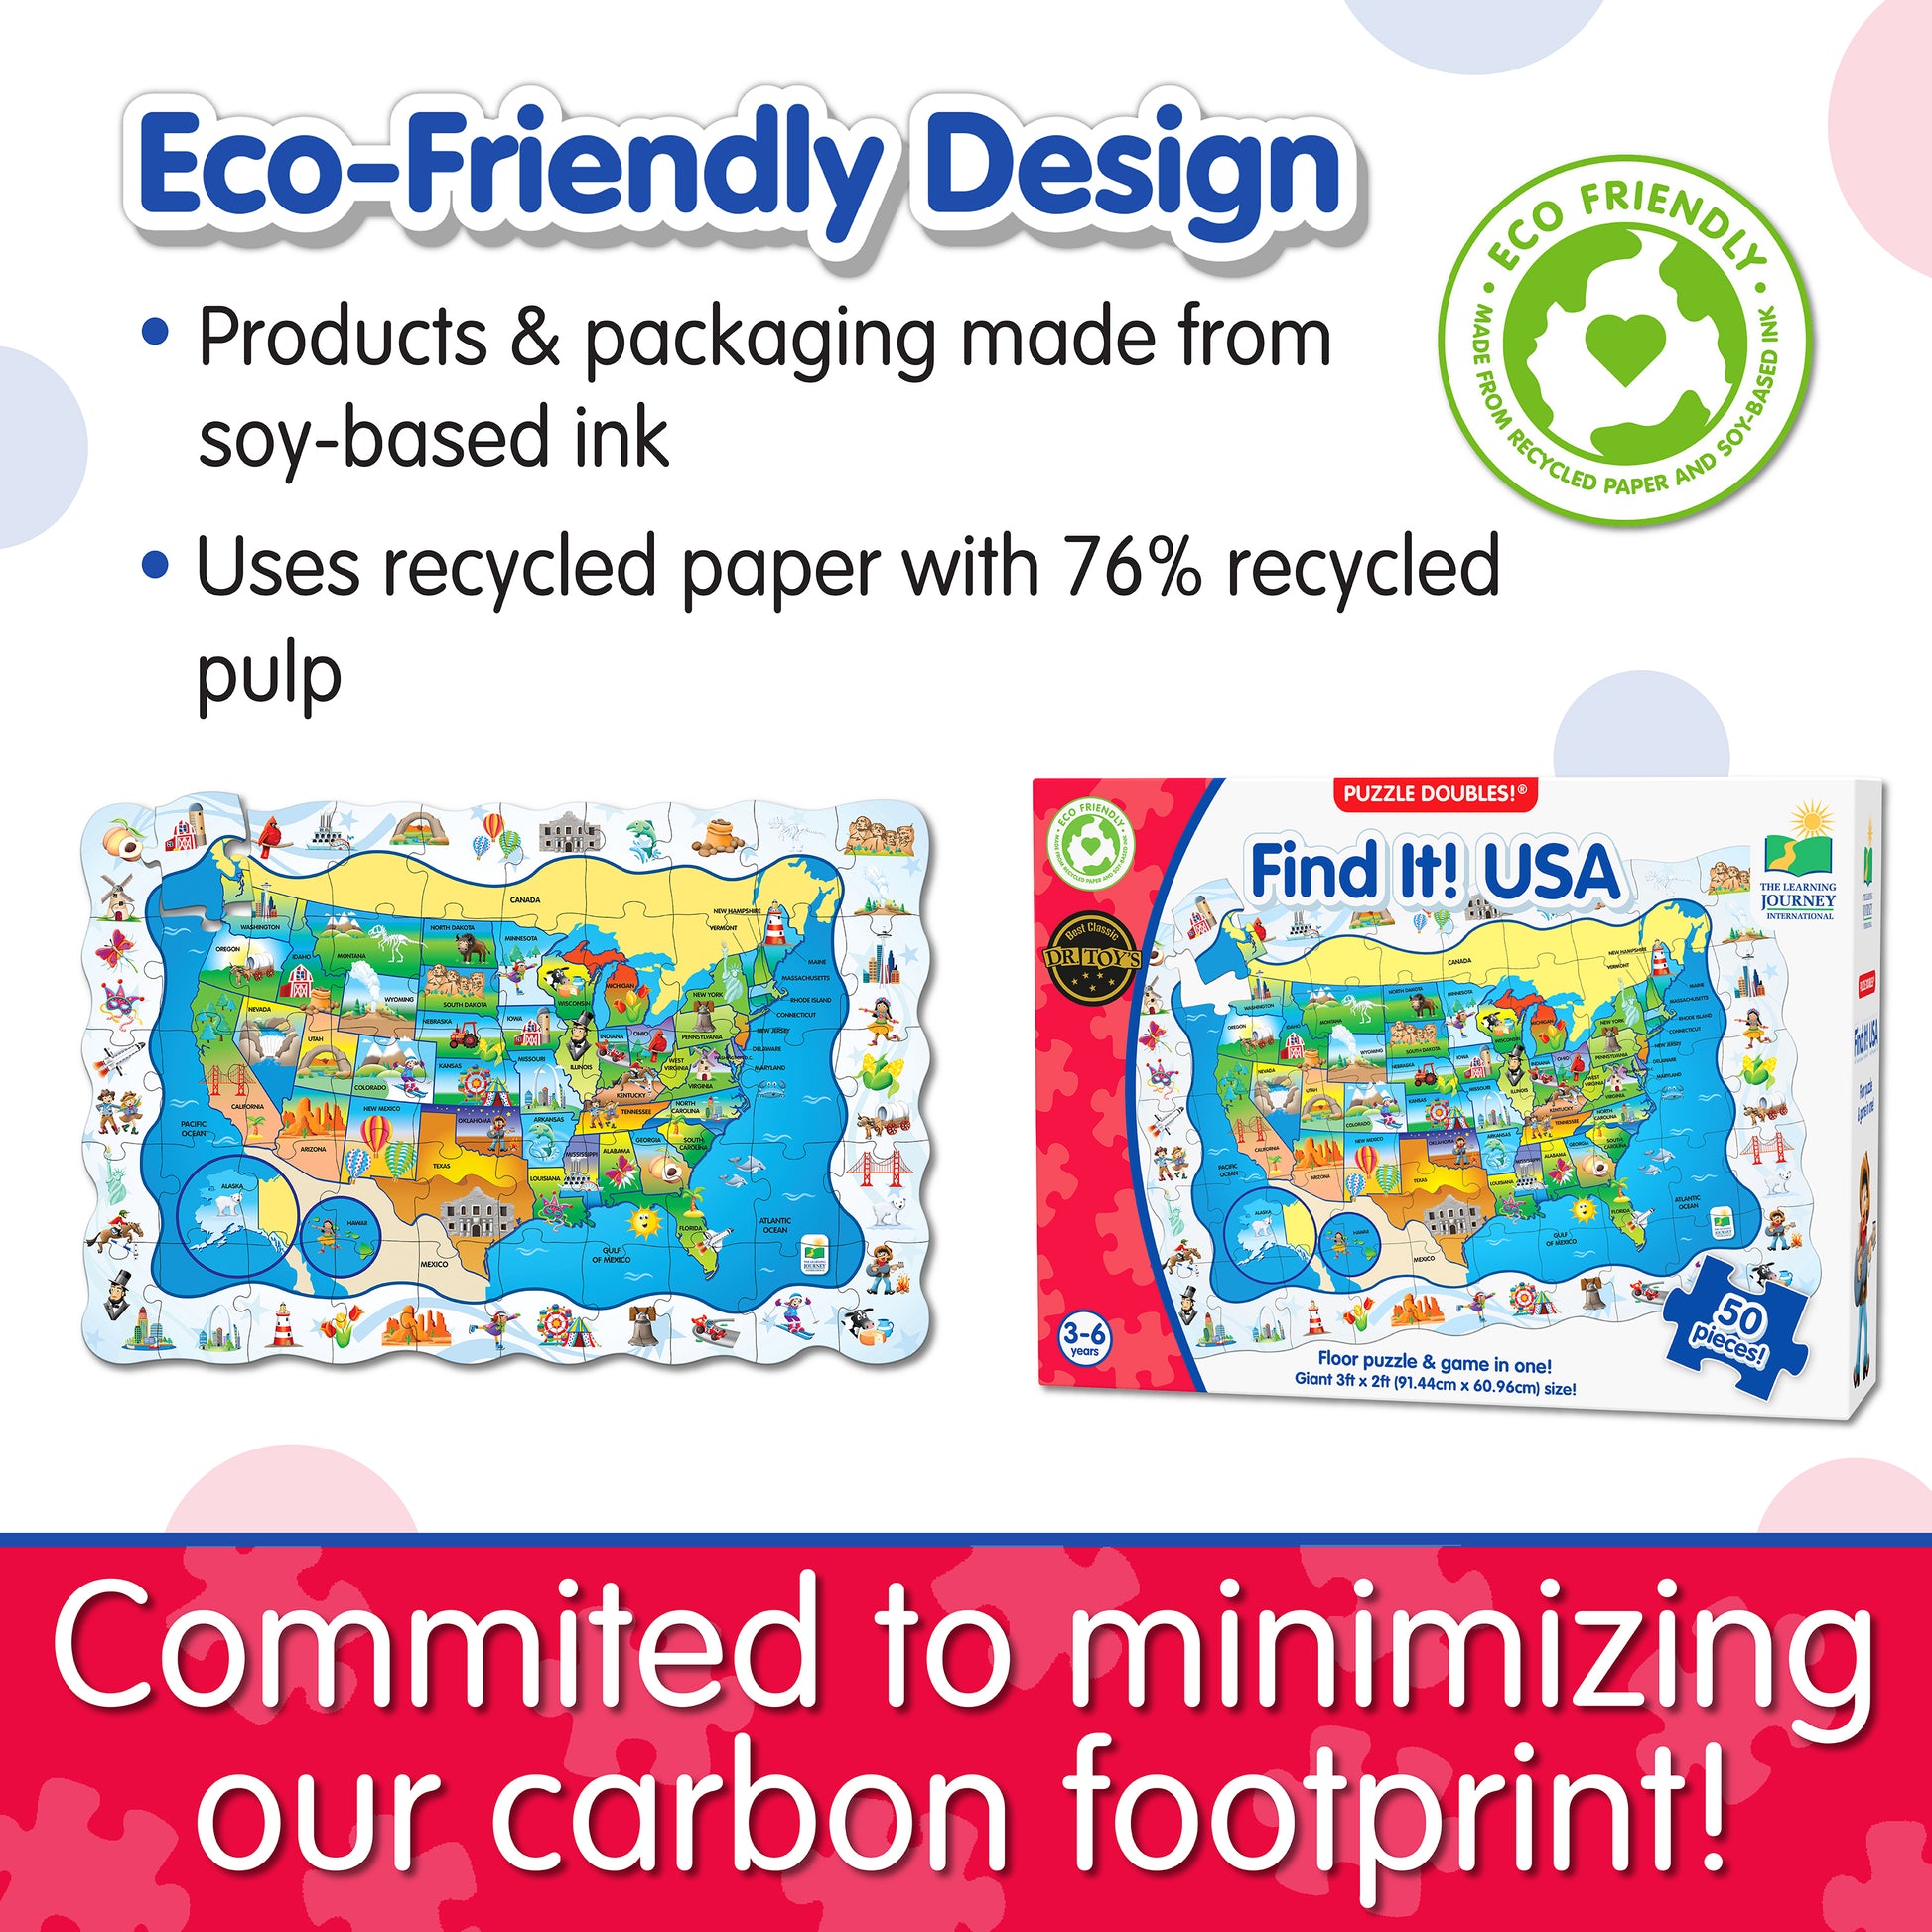 Infographic about Find It - USA's eco-friendly design that says, "Committed to minimizing our carbon footprint!"